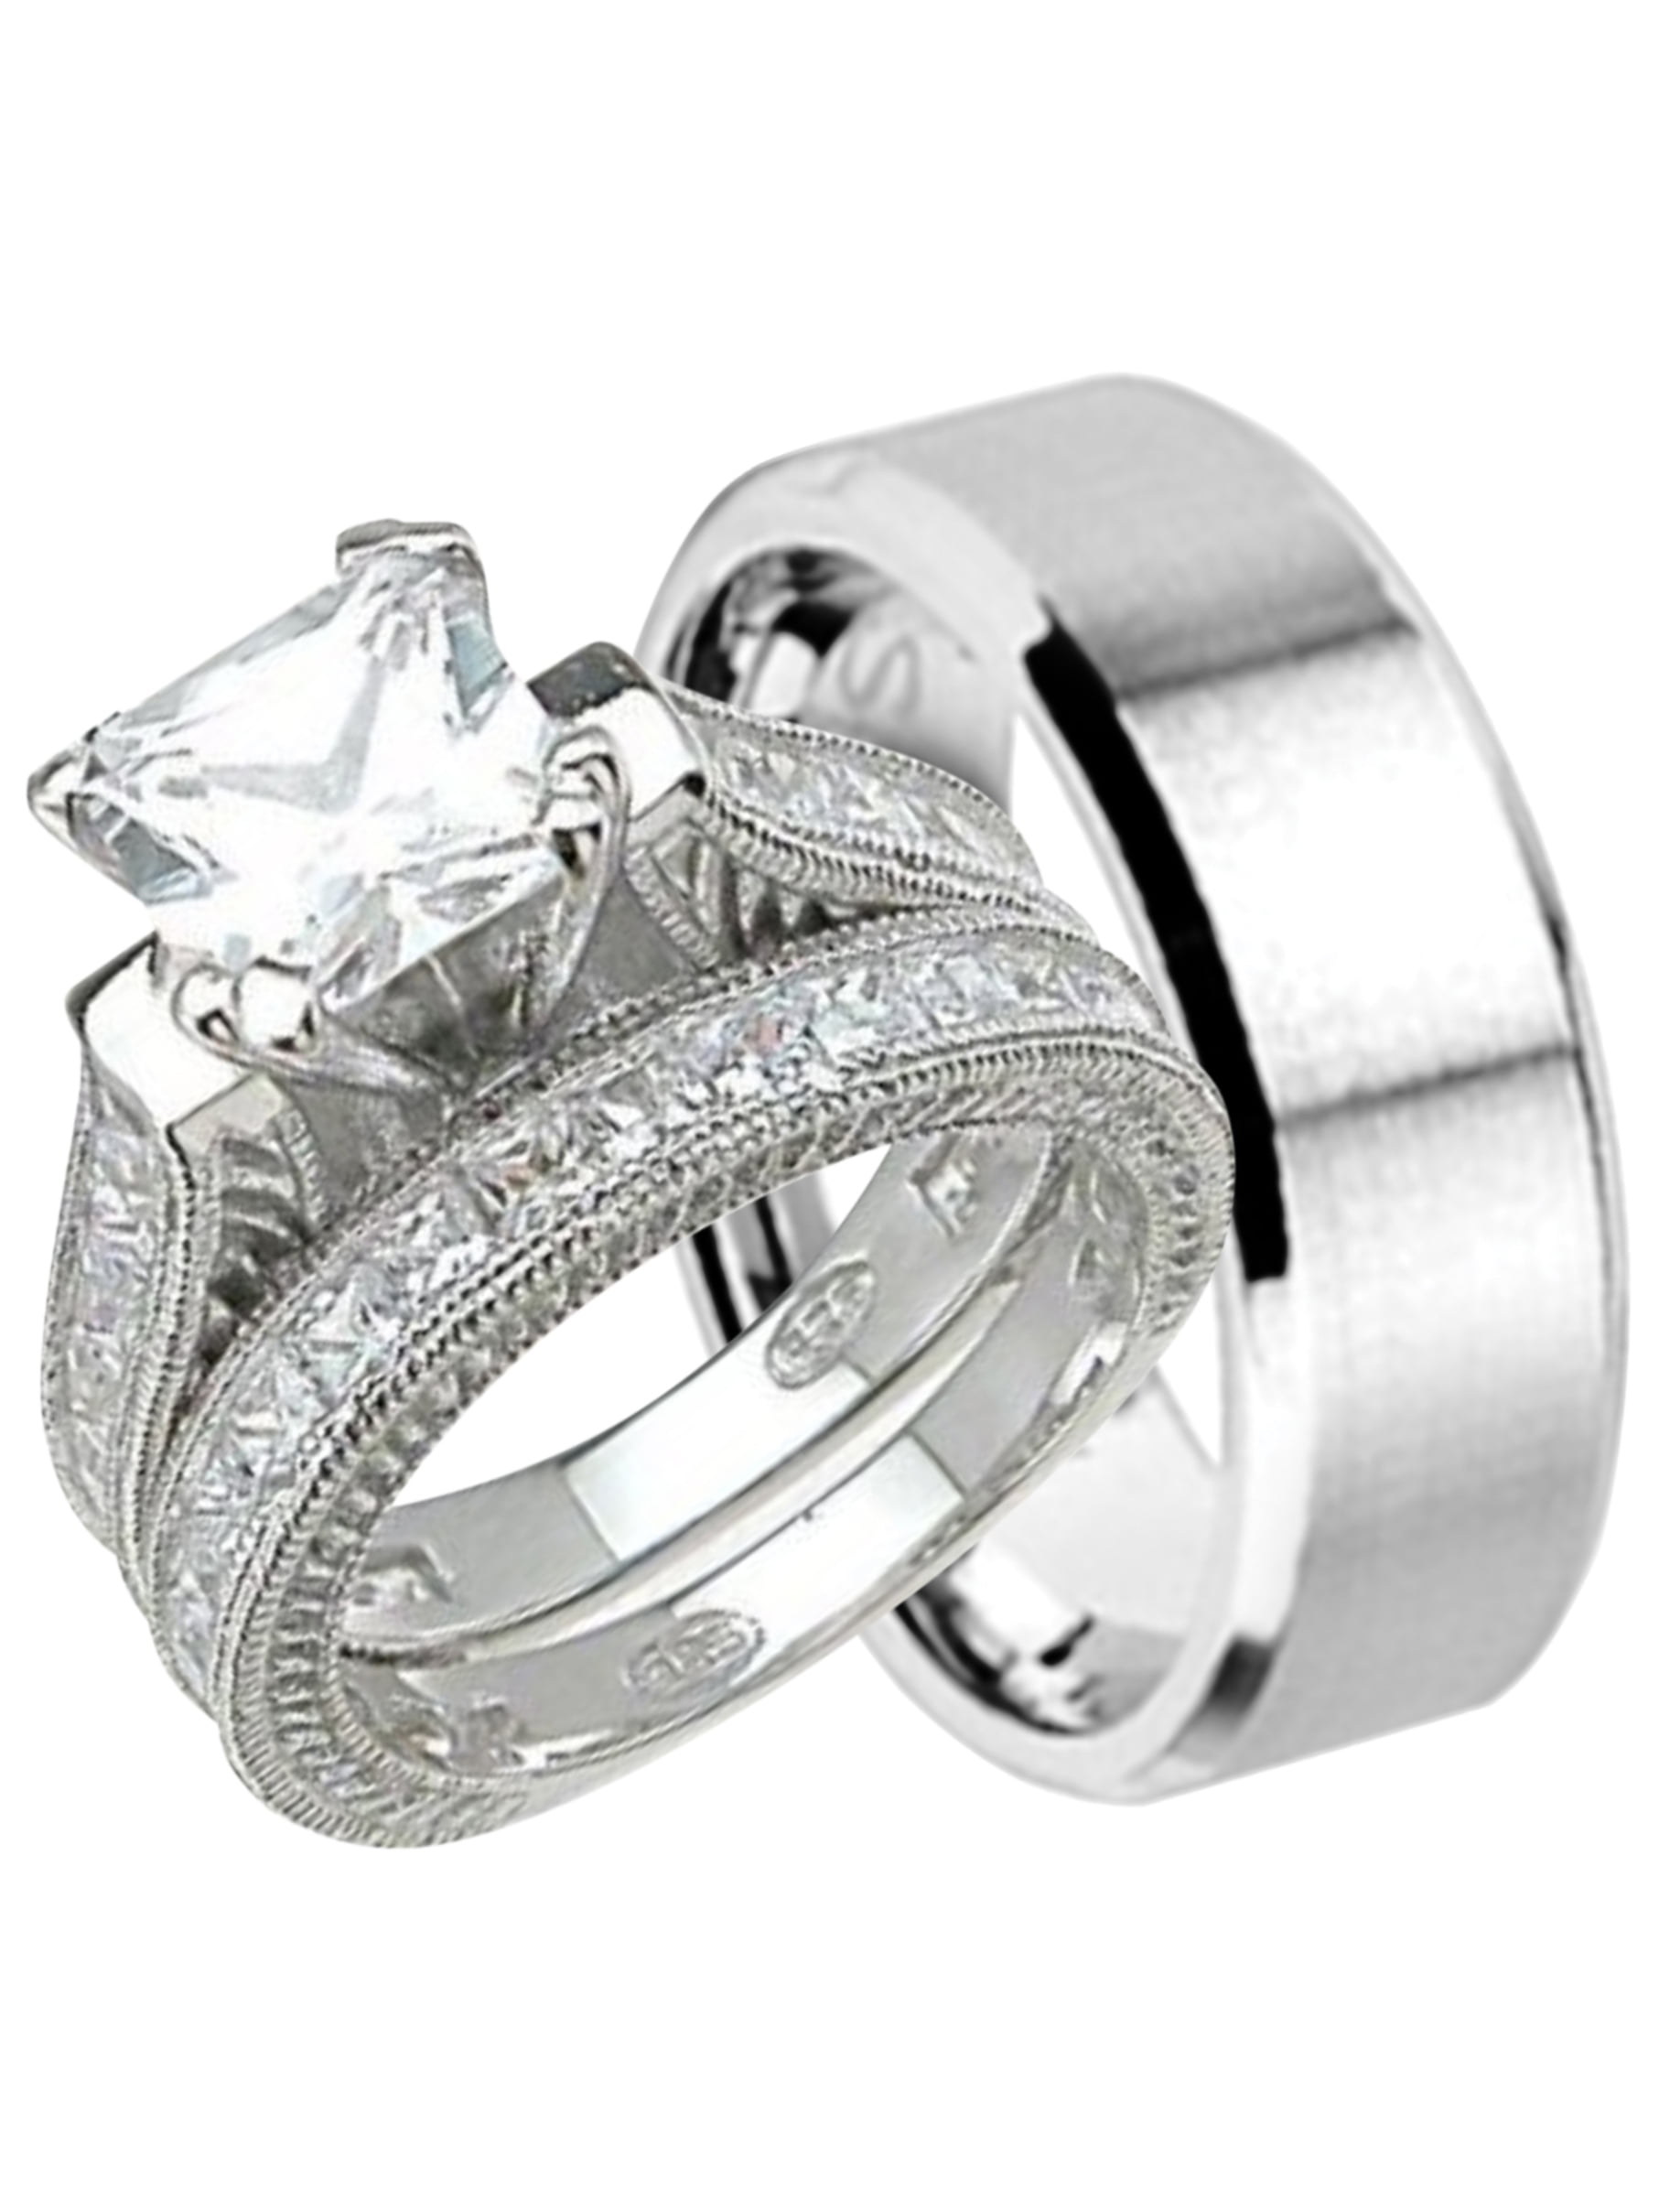 LaRaso & Co - His and Hers Wedding Ring Set Cheap Wedding Bands for Him and Her (7/8) - www.bagssaleusa.com